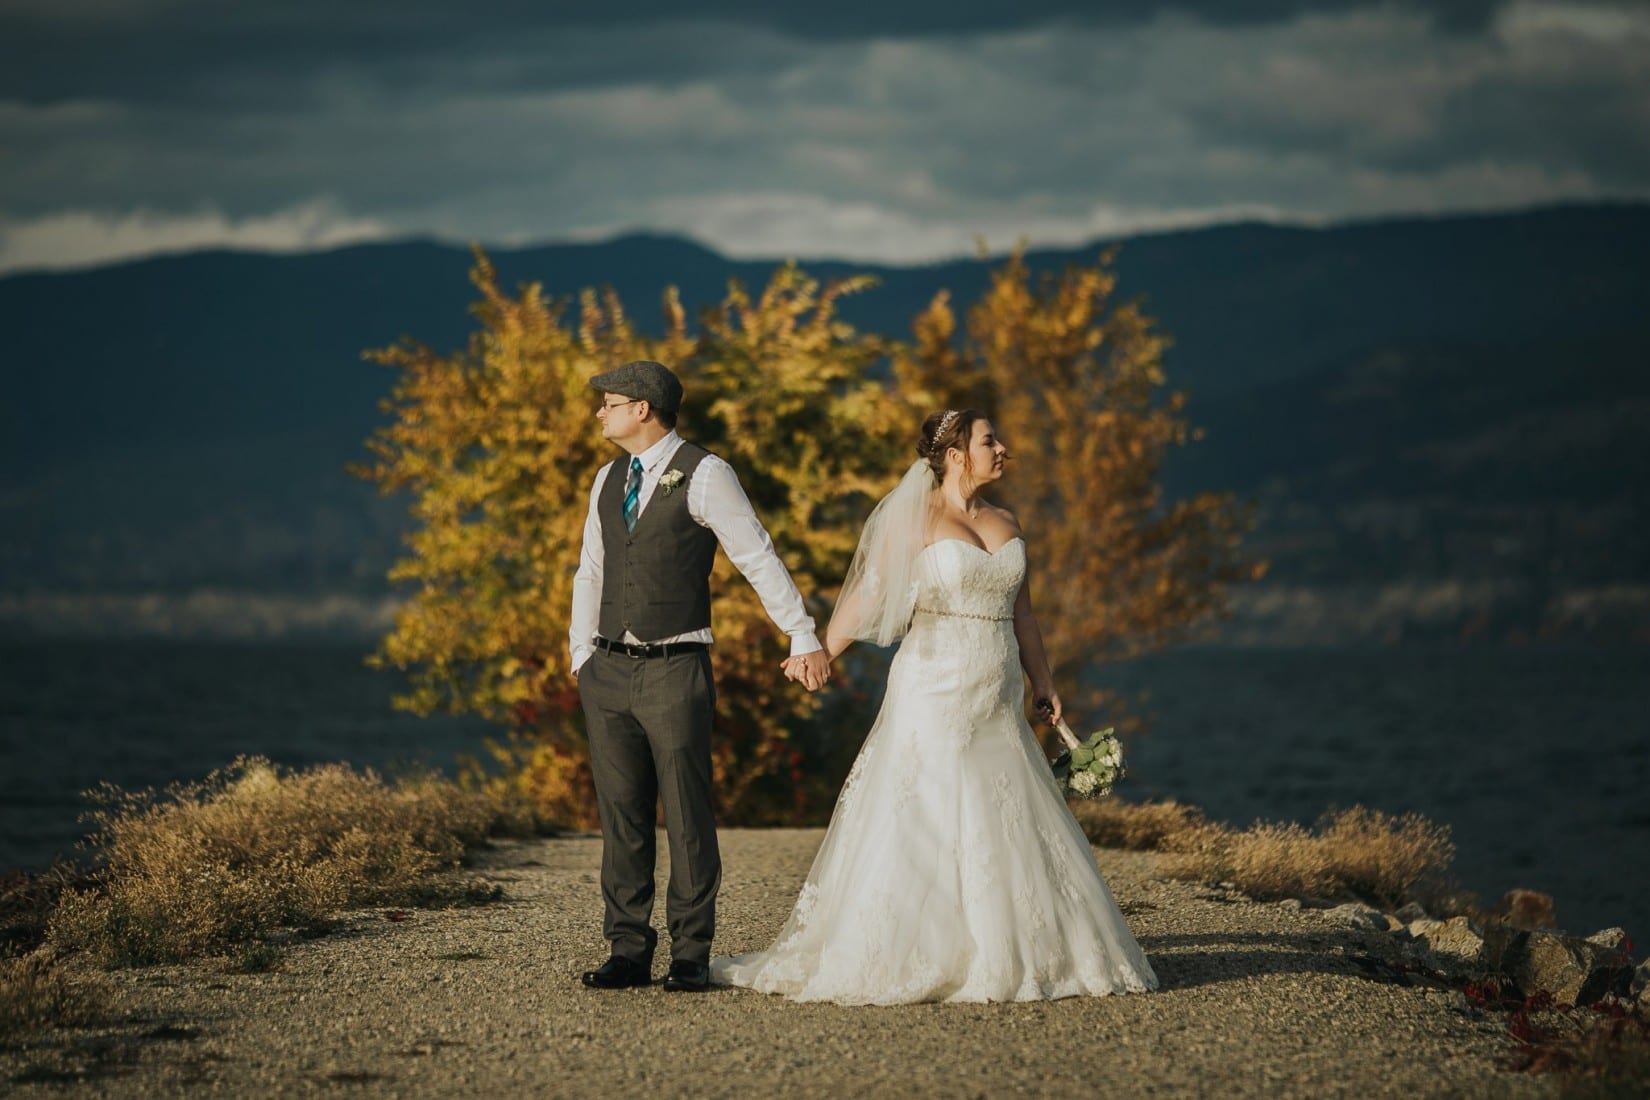 ss sicamous penticton wedding photography